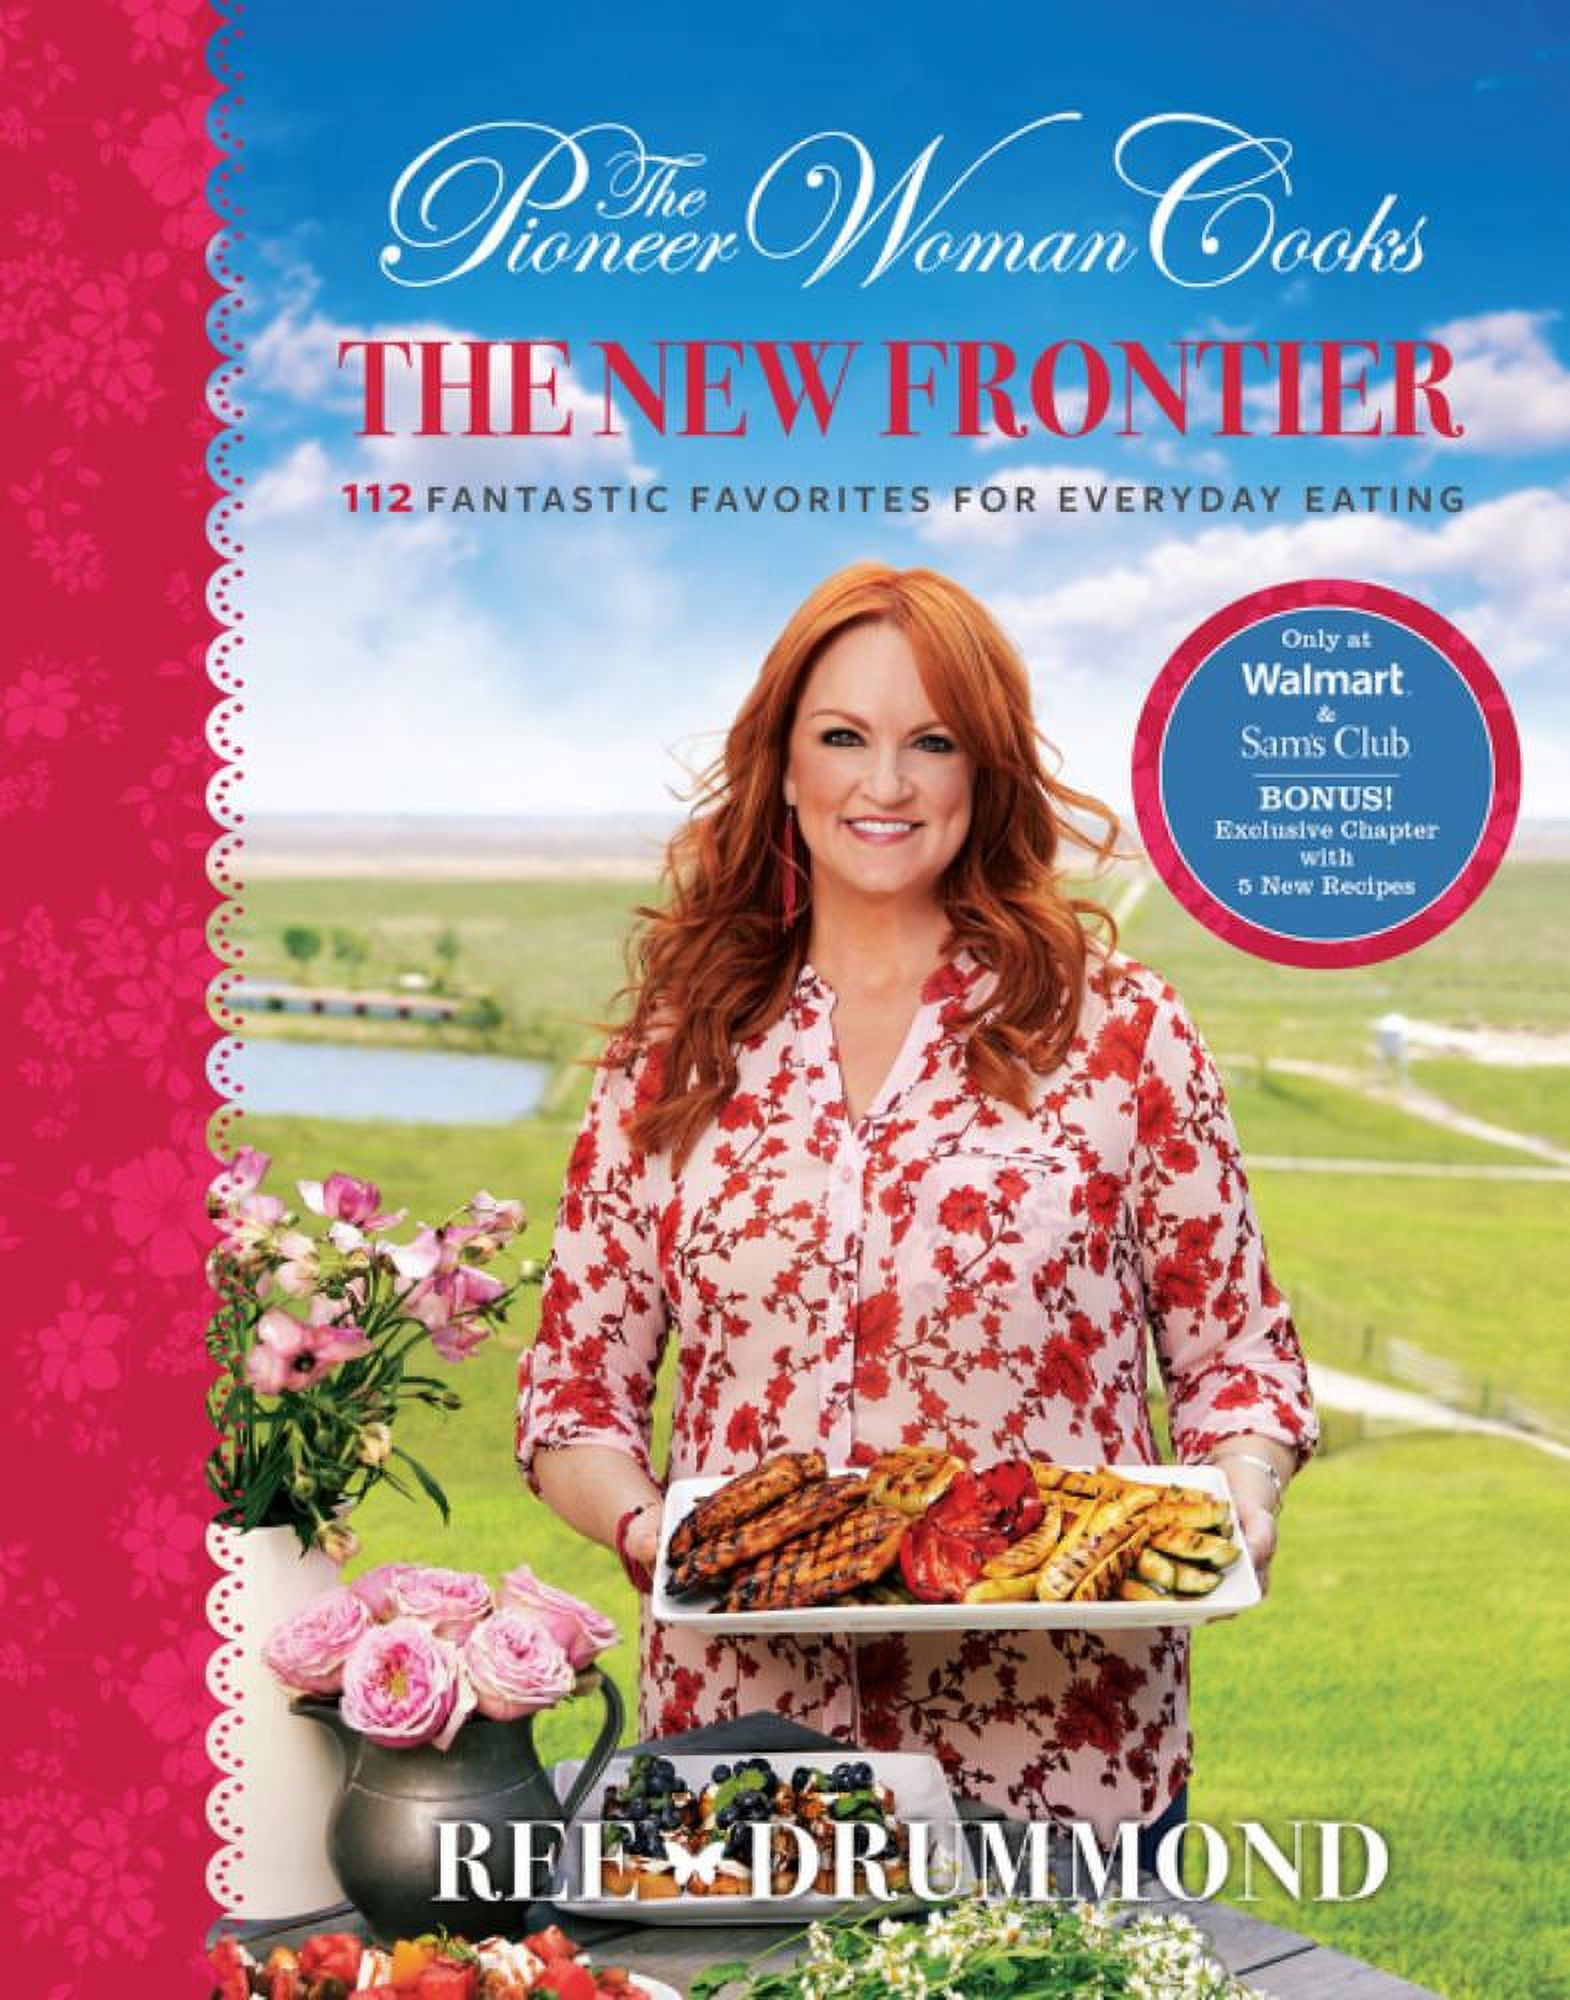 The Pioneer Woman Cooks: The New Frontier (Walmart Exclusive) - image 1 of 2